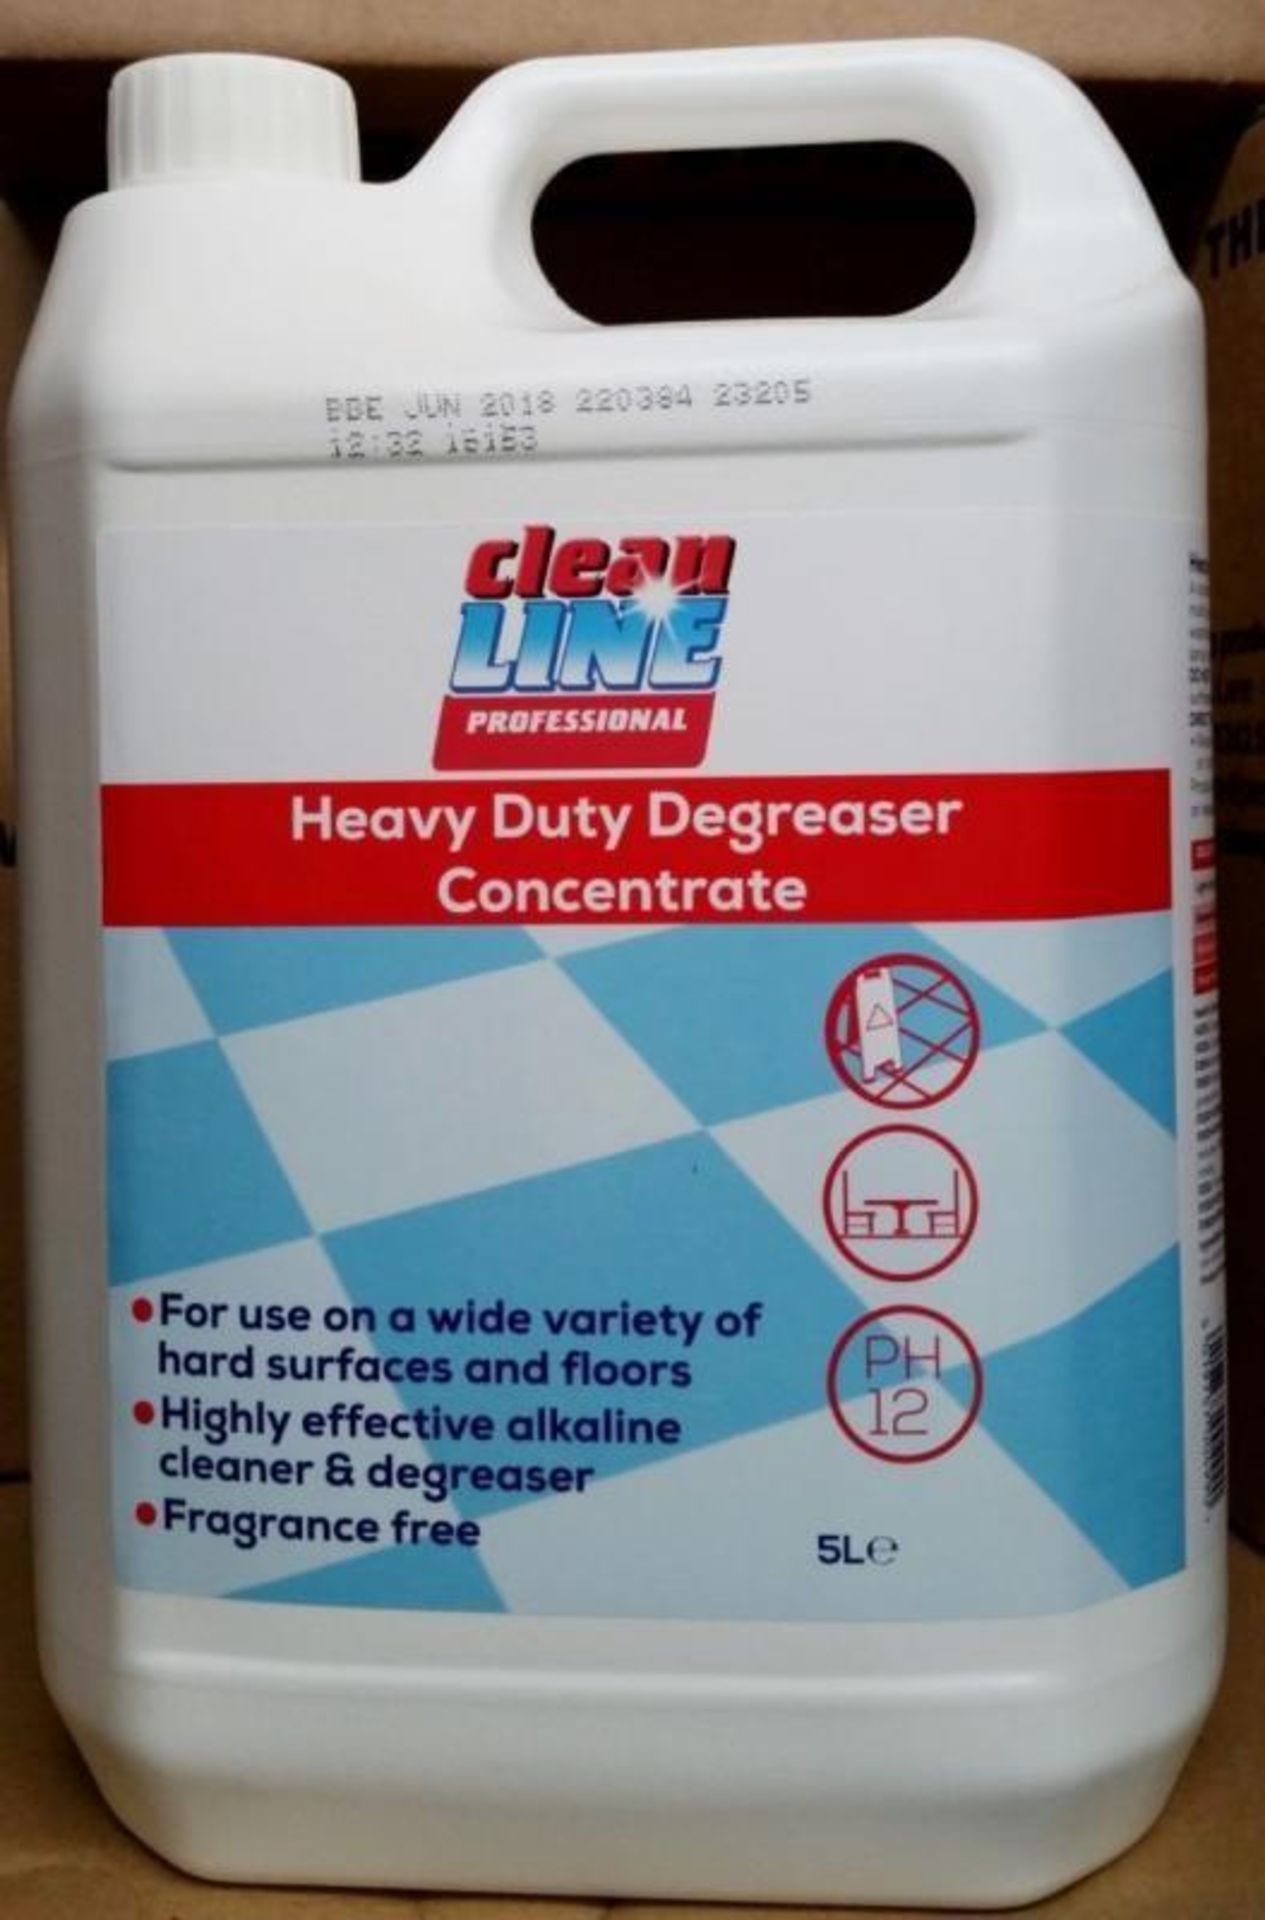 2 x Clean Line Professional 5 Litre Heavy Duty Degreaser Concentrate - Alkaline Cleaner & Degreaser